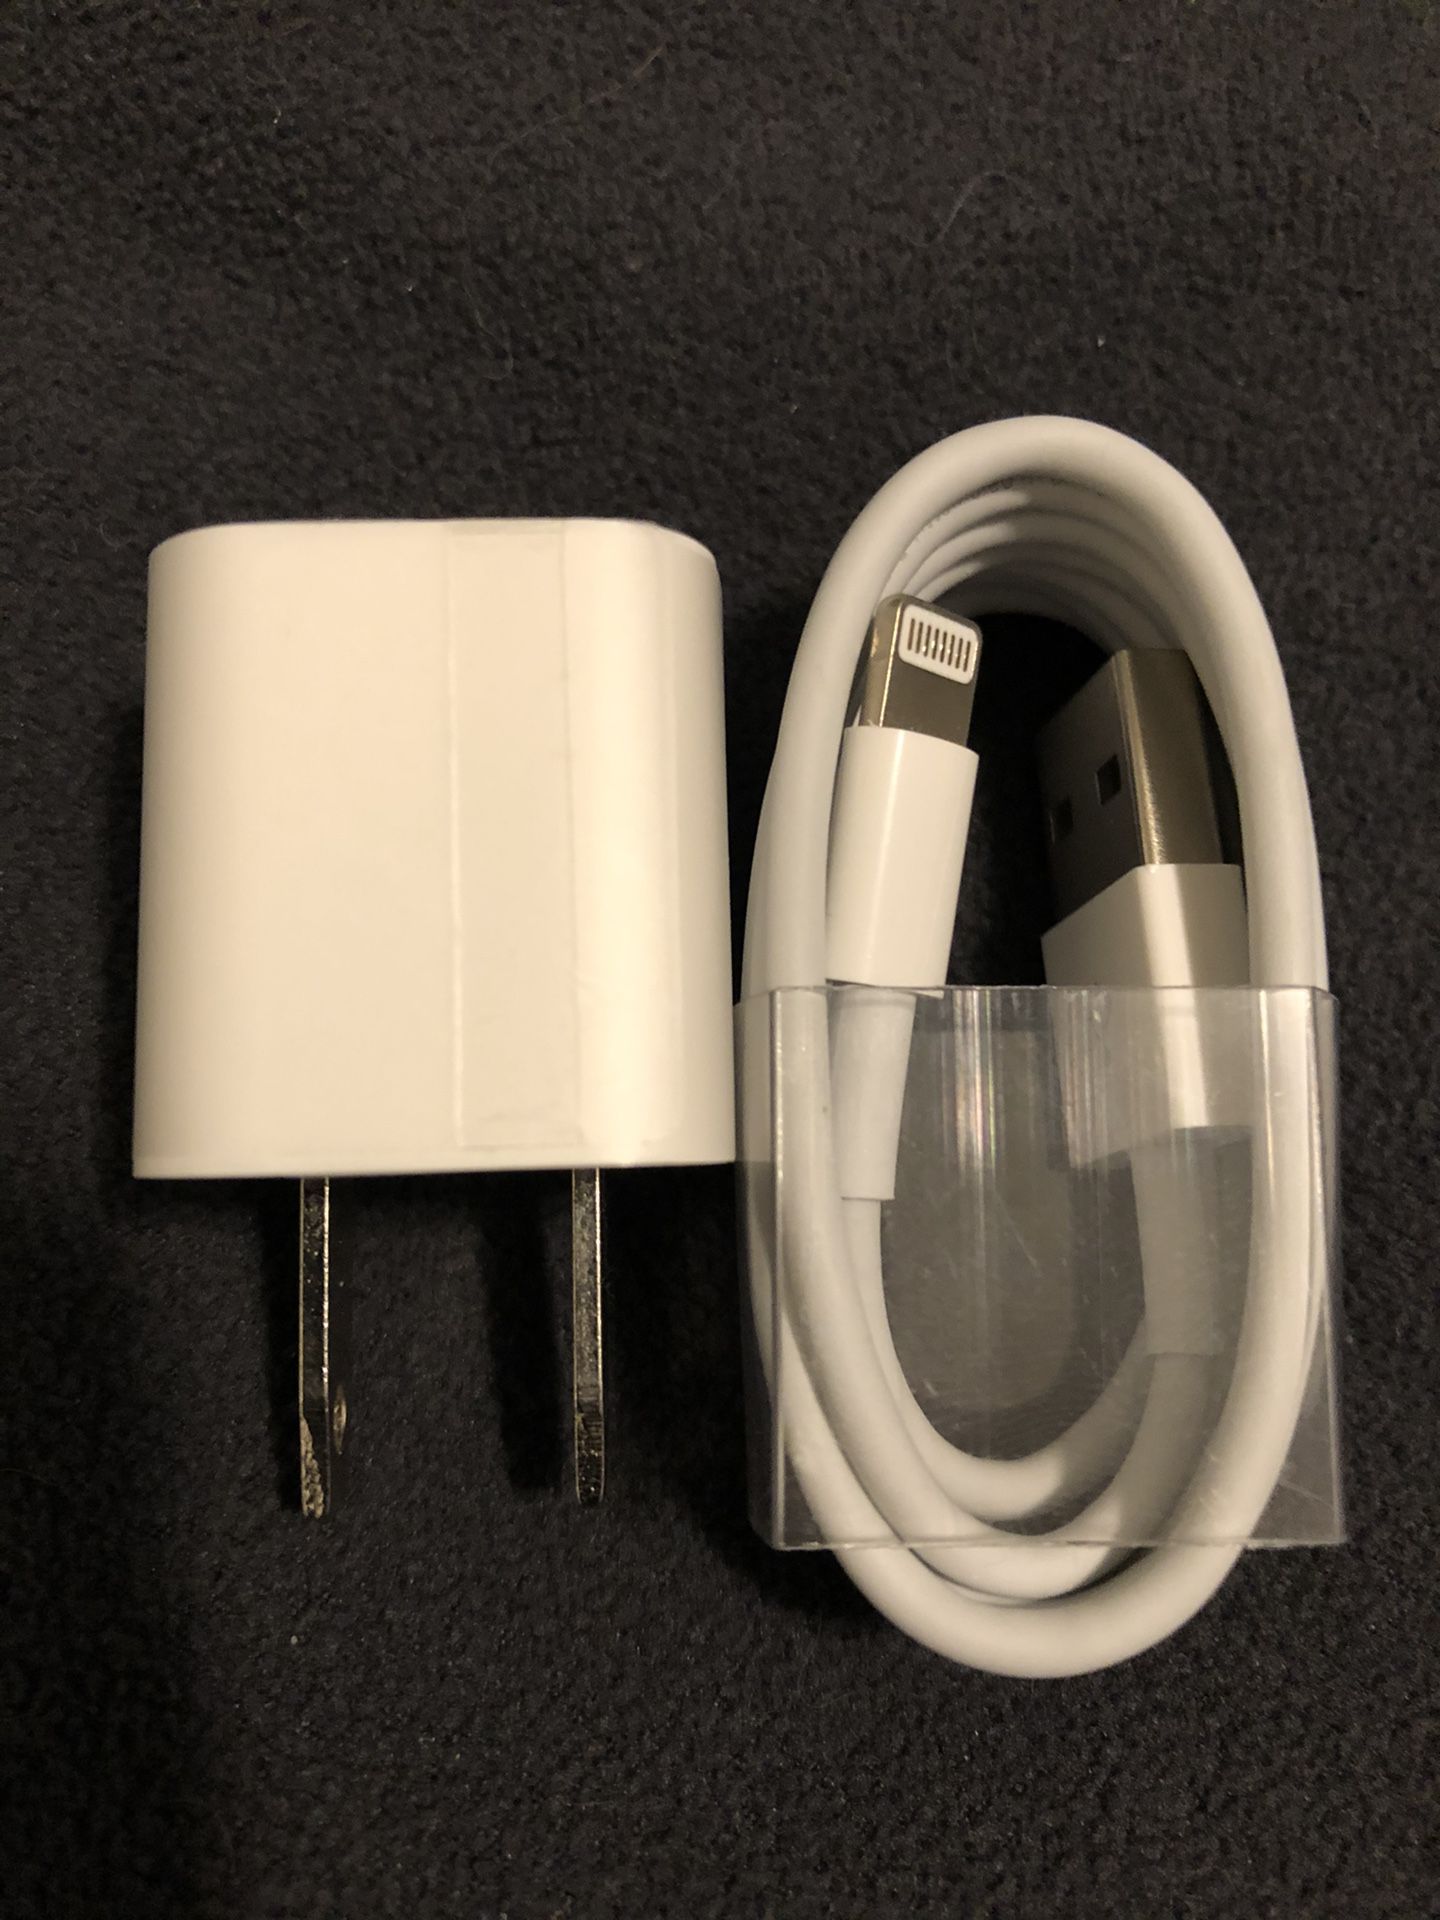 3Ft USB Lightning Cable Charger For Apple iPhone X 10 8 7 6 Plus 5se. Over 200 chargers available. Bulk order for better pricing White USB Power Ada